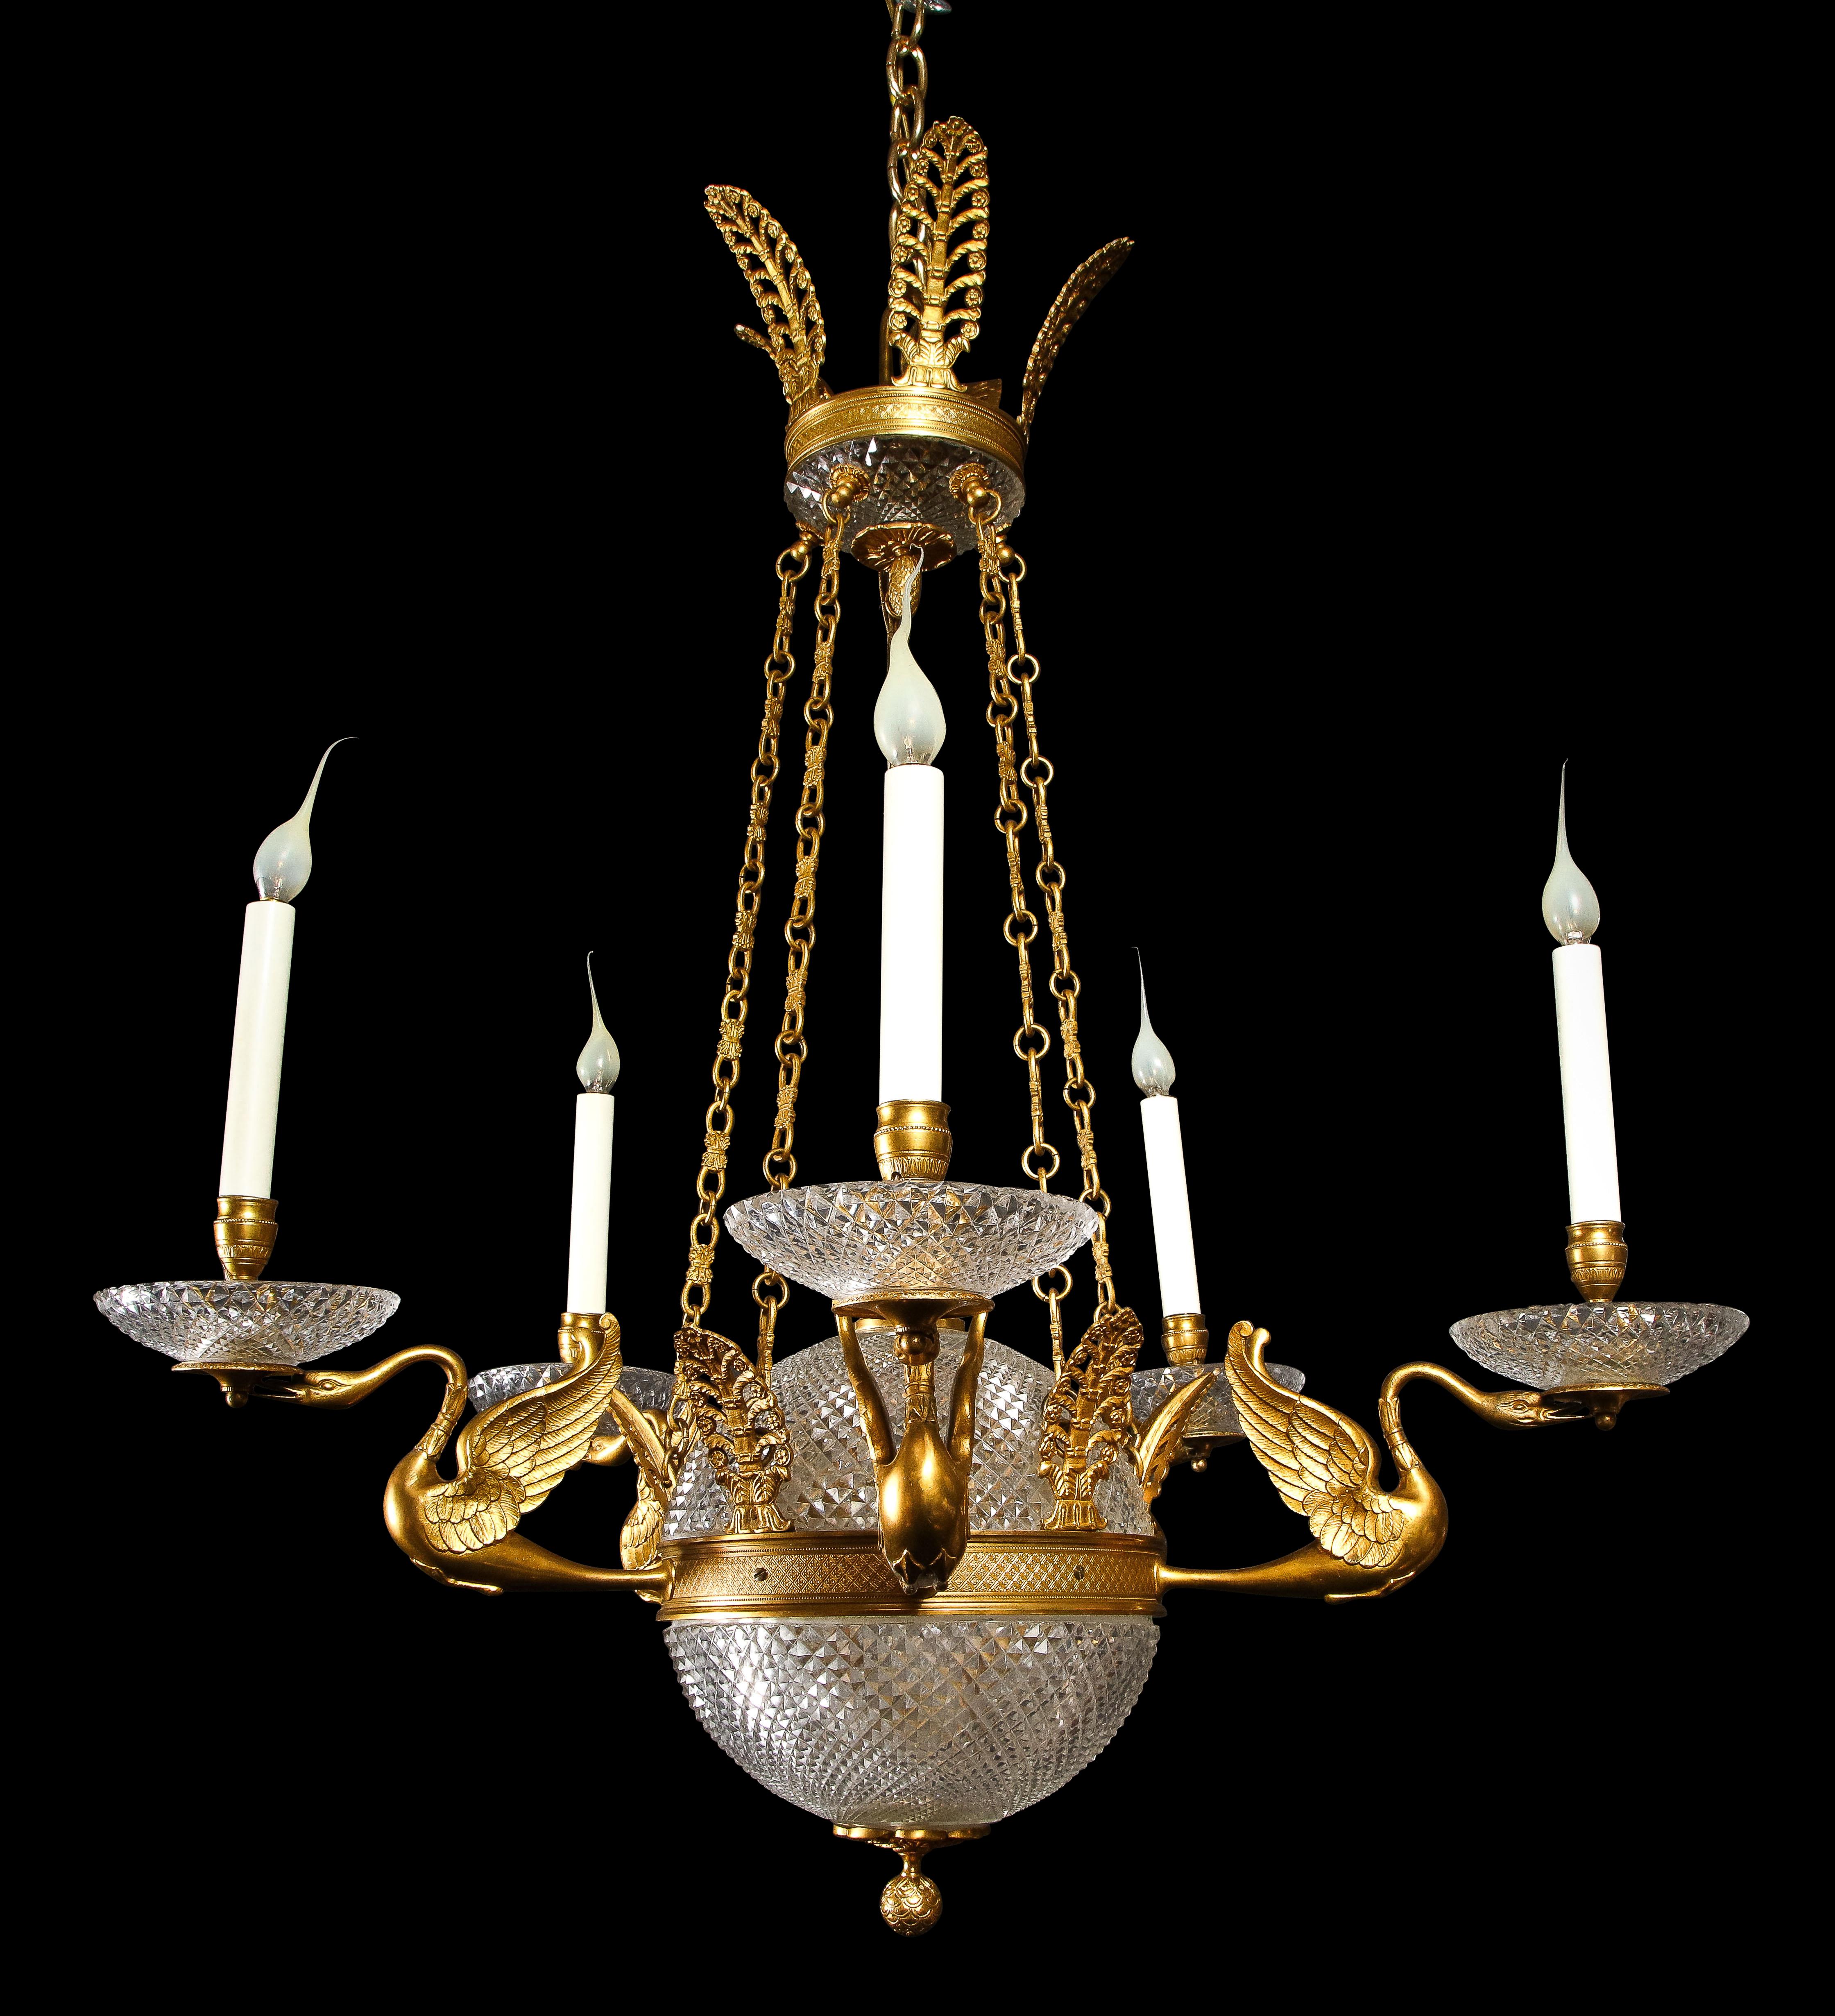 A Unique Large Antique French Hollywood Regency Gilt Bronze and Cut crystal ball form multi light swan chandelier. This fine chandelier is embellsihed with a large central cut crystal ball which is adorned with six gilt bronze arms of superb detail